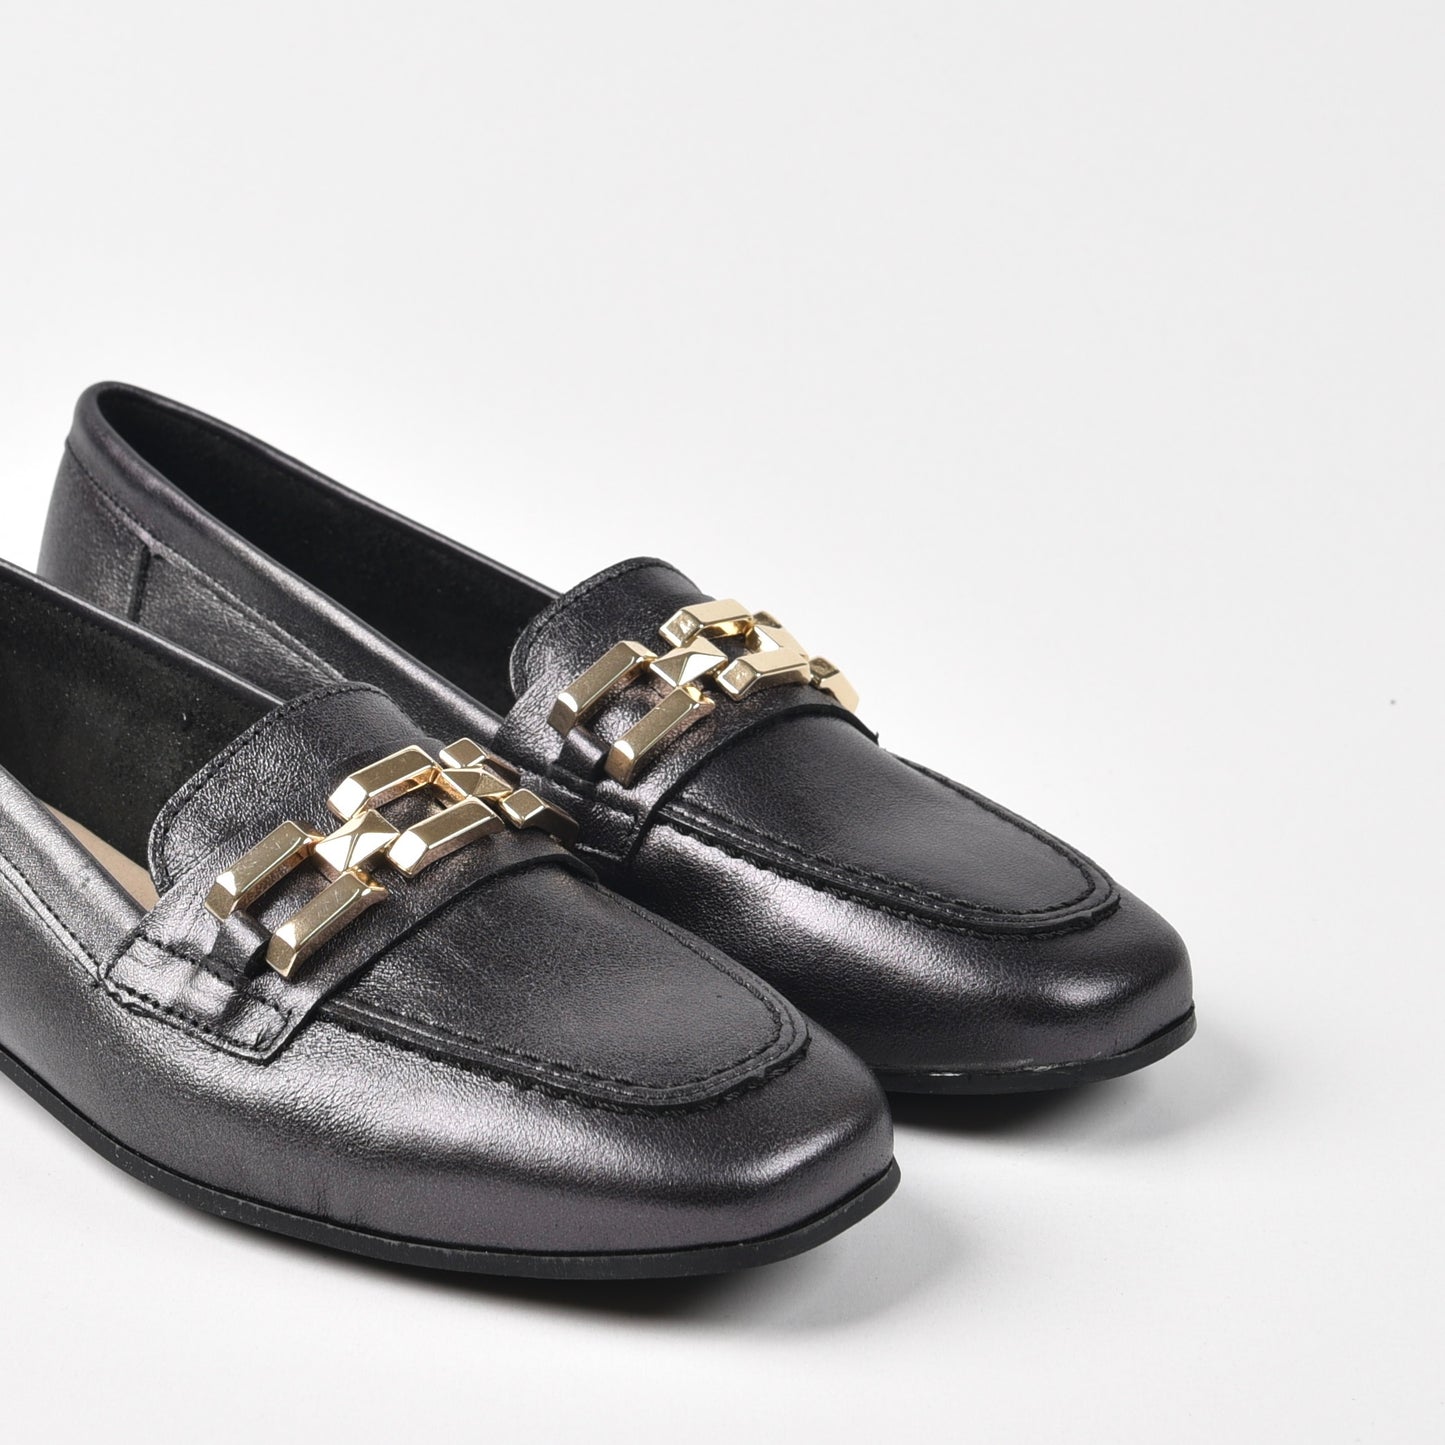 Pitillos Spanish Classic loafers for Women in Black.